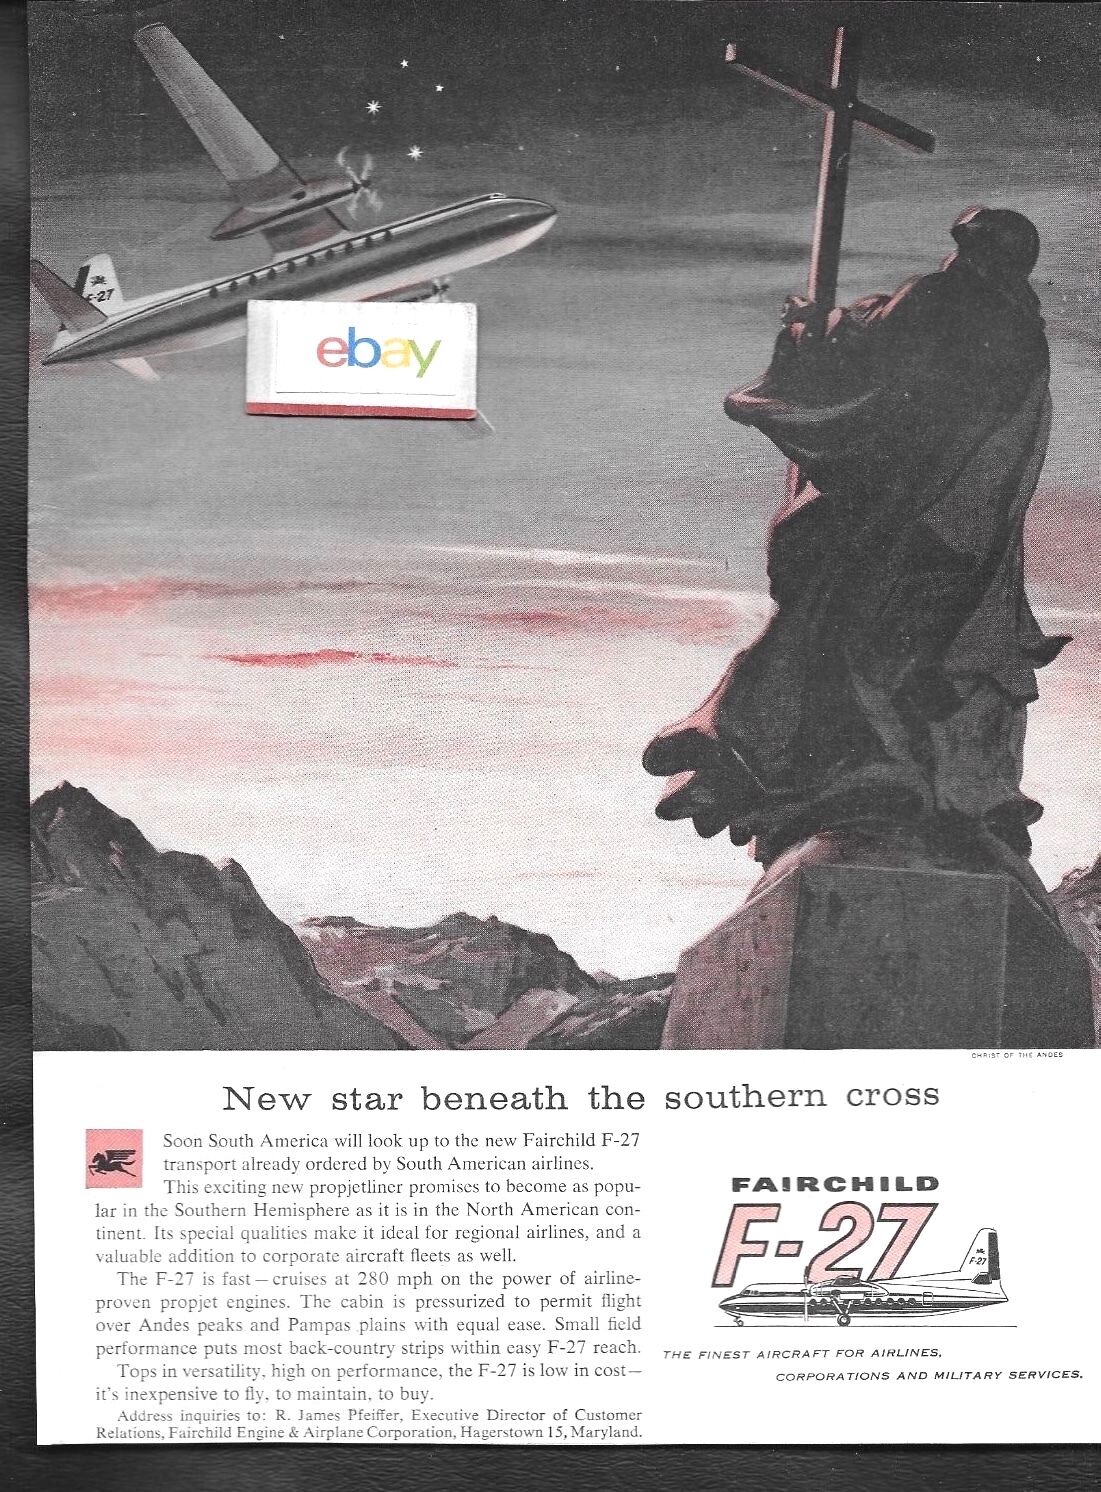 FAIRCHILD AIRPLANE COMPANY F-27 NEW STAR BENEATH SOUTHERN CROSS CHRIST ANDES AD